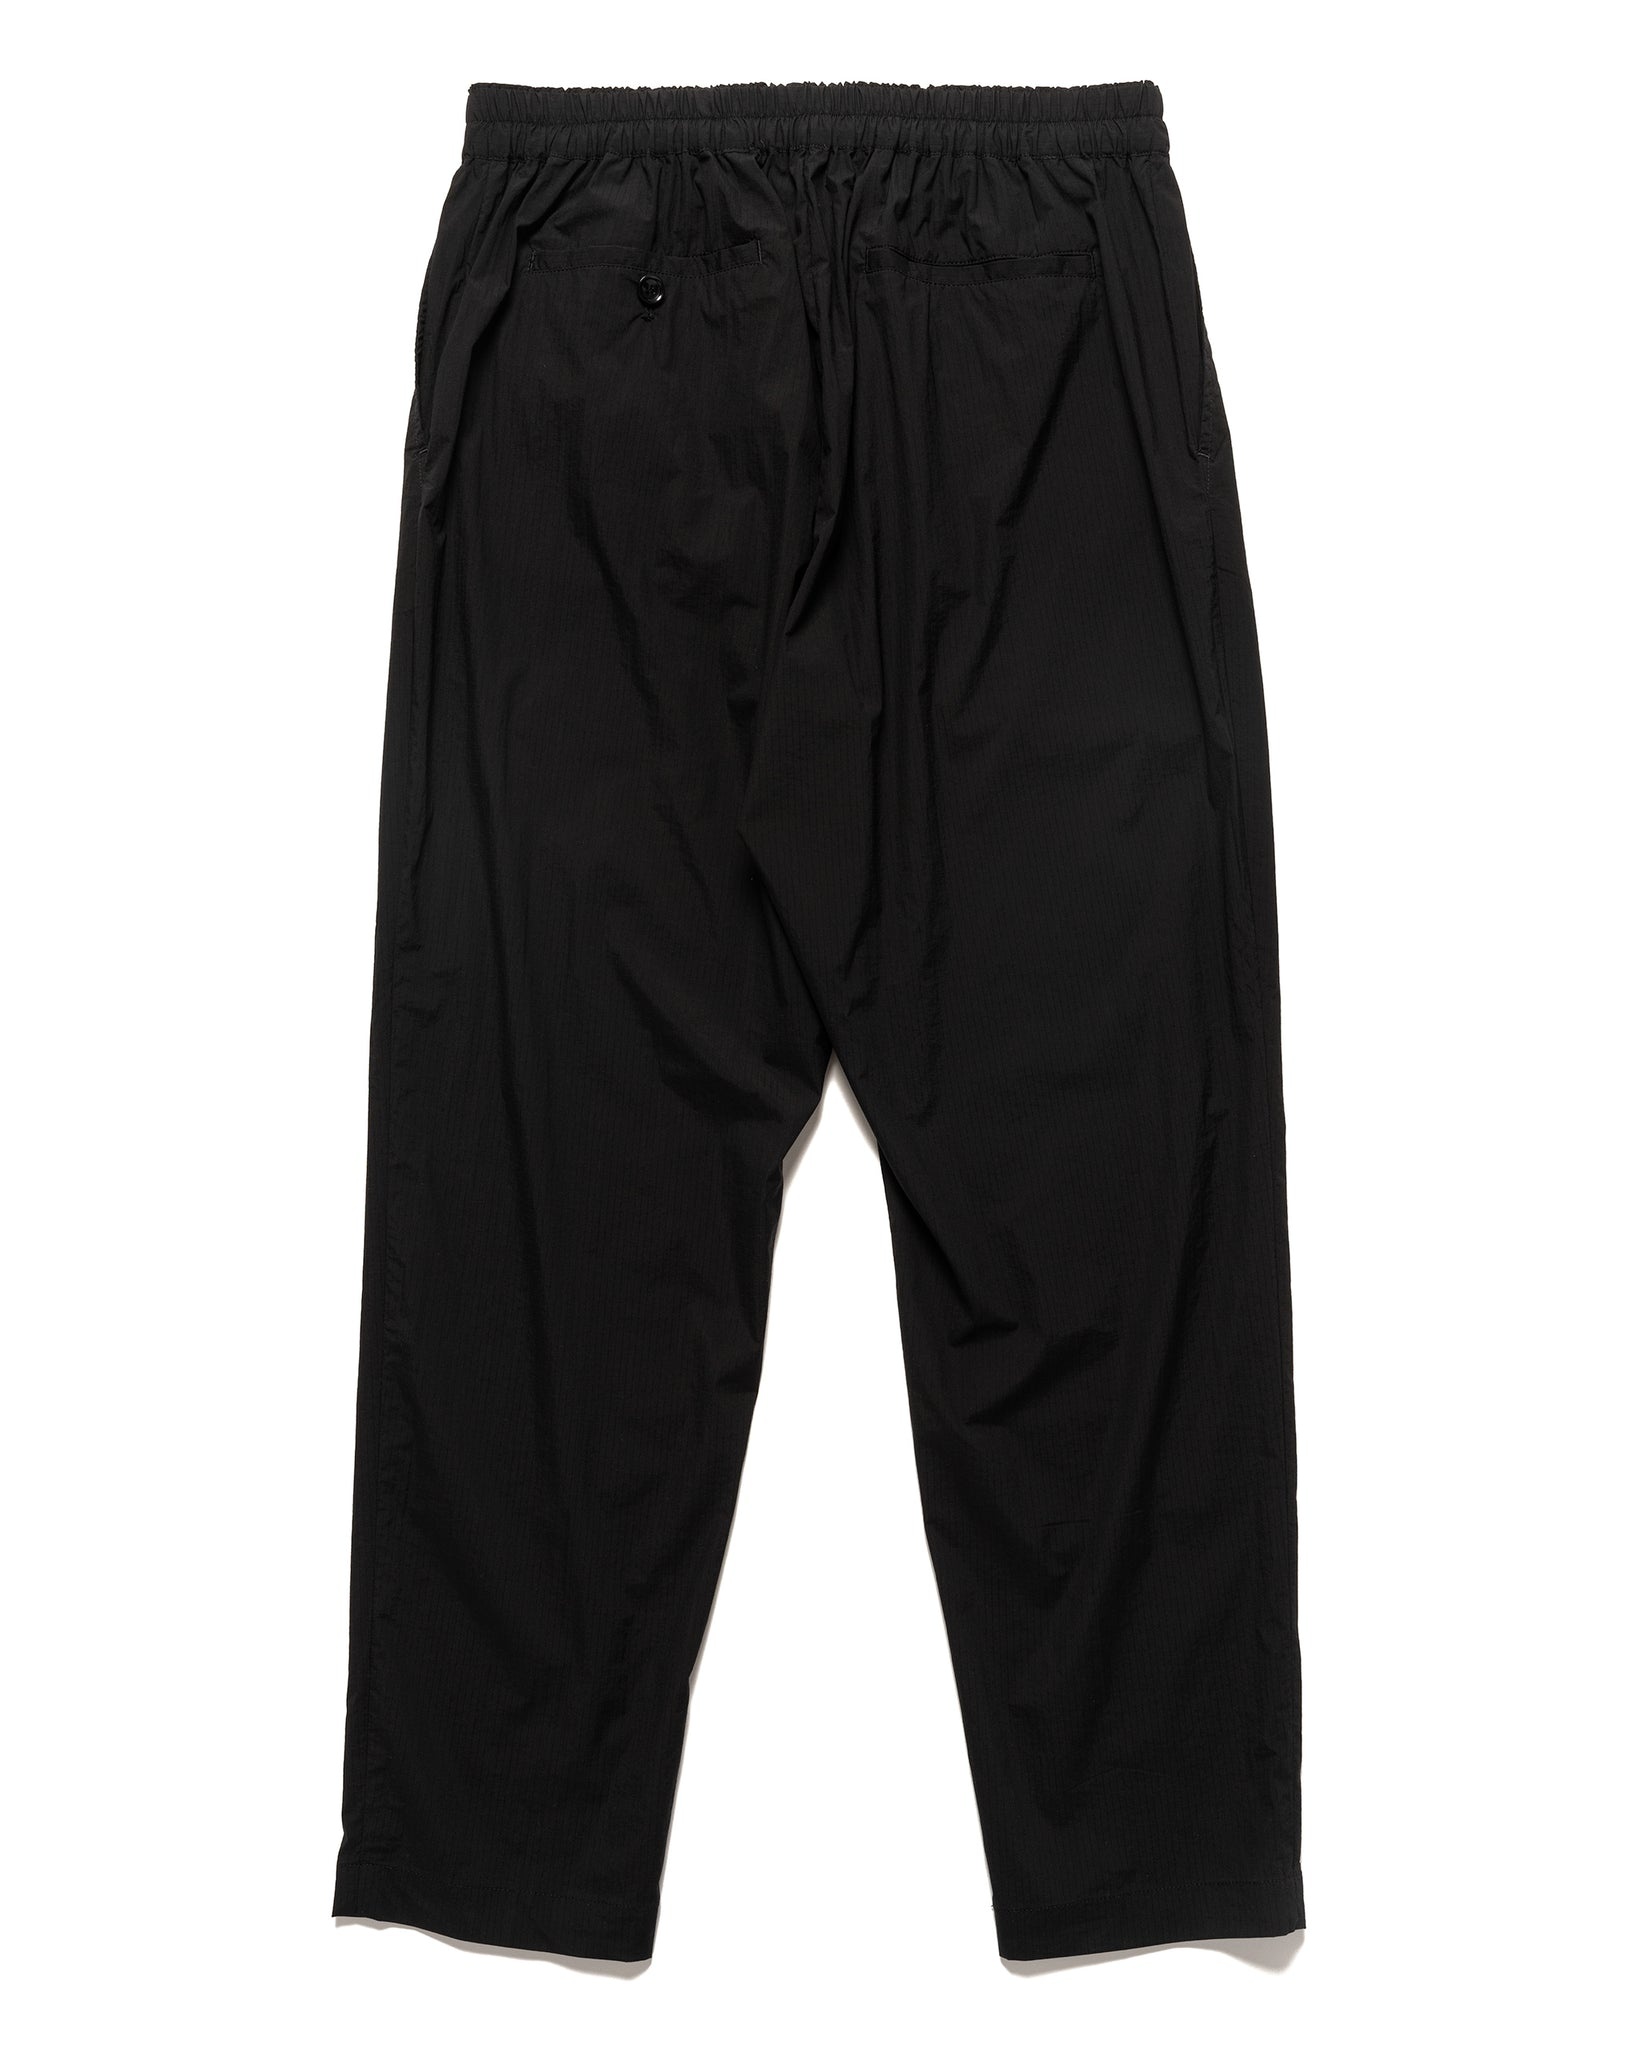 SOPHNET. Light Weight Stretch Rip Stop Tapered Easy Pants Black